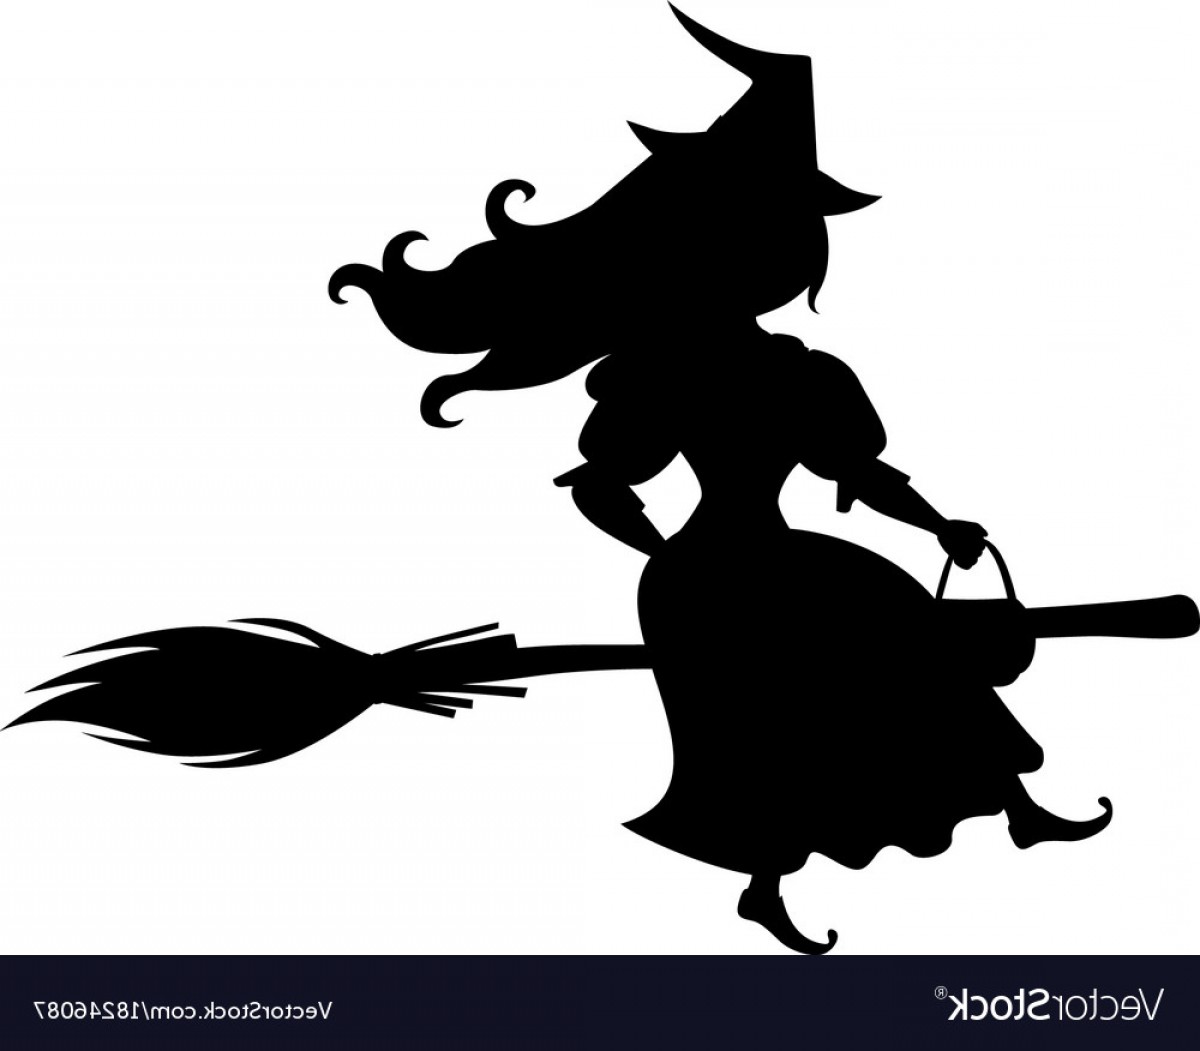 Download Free SVG Witch Silhouette Vector at Vectorified.com Collection of ...